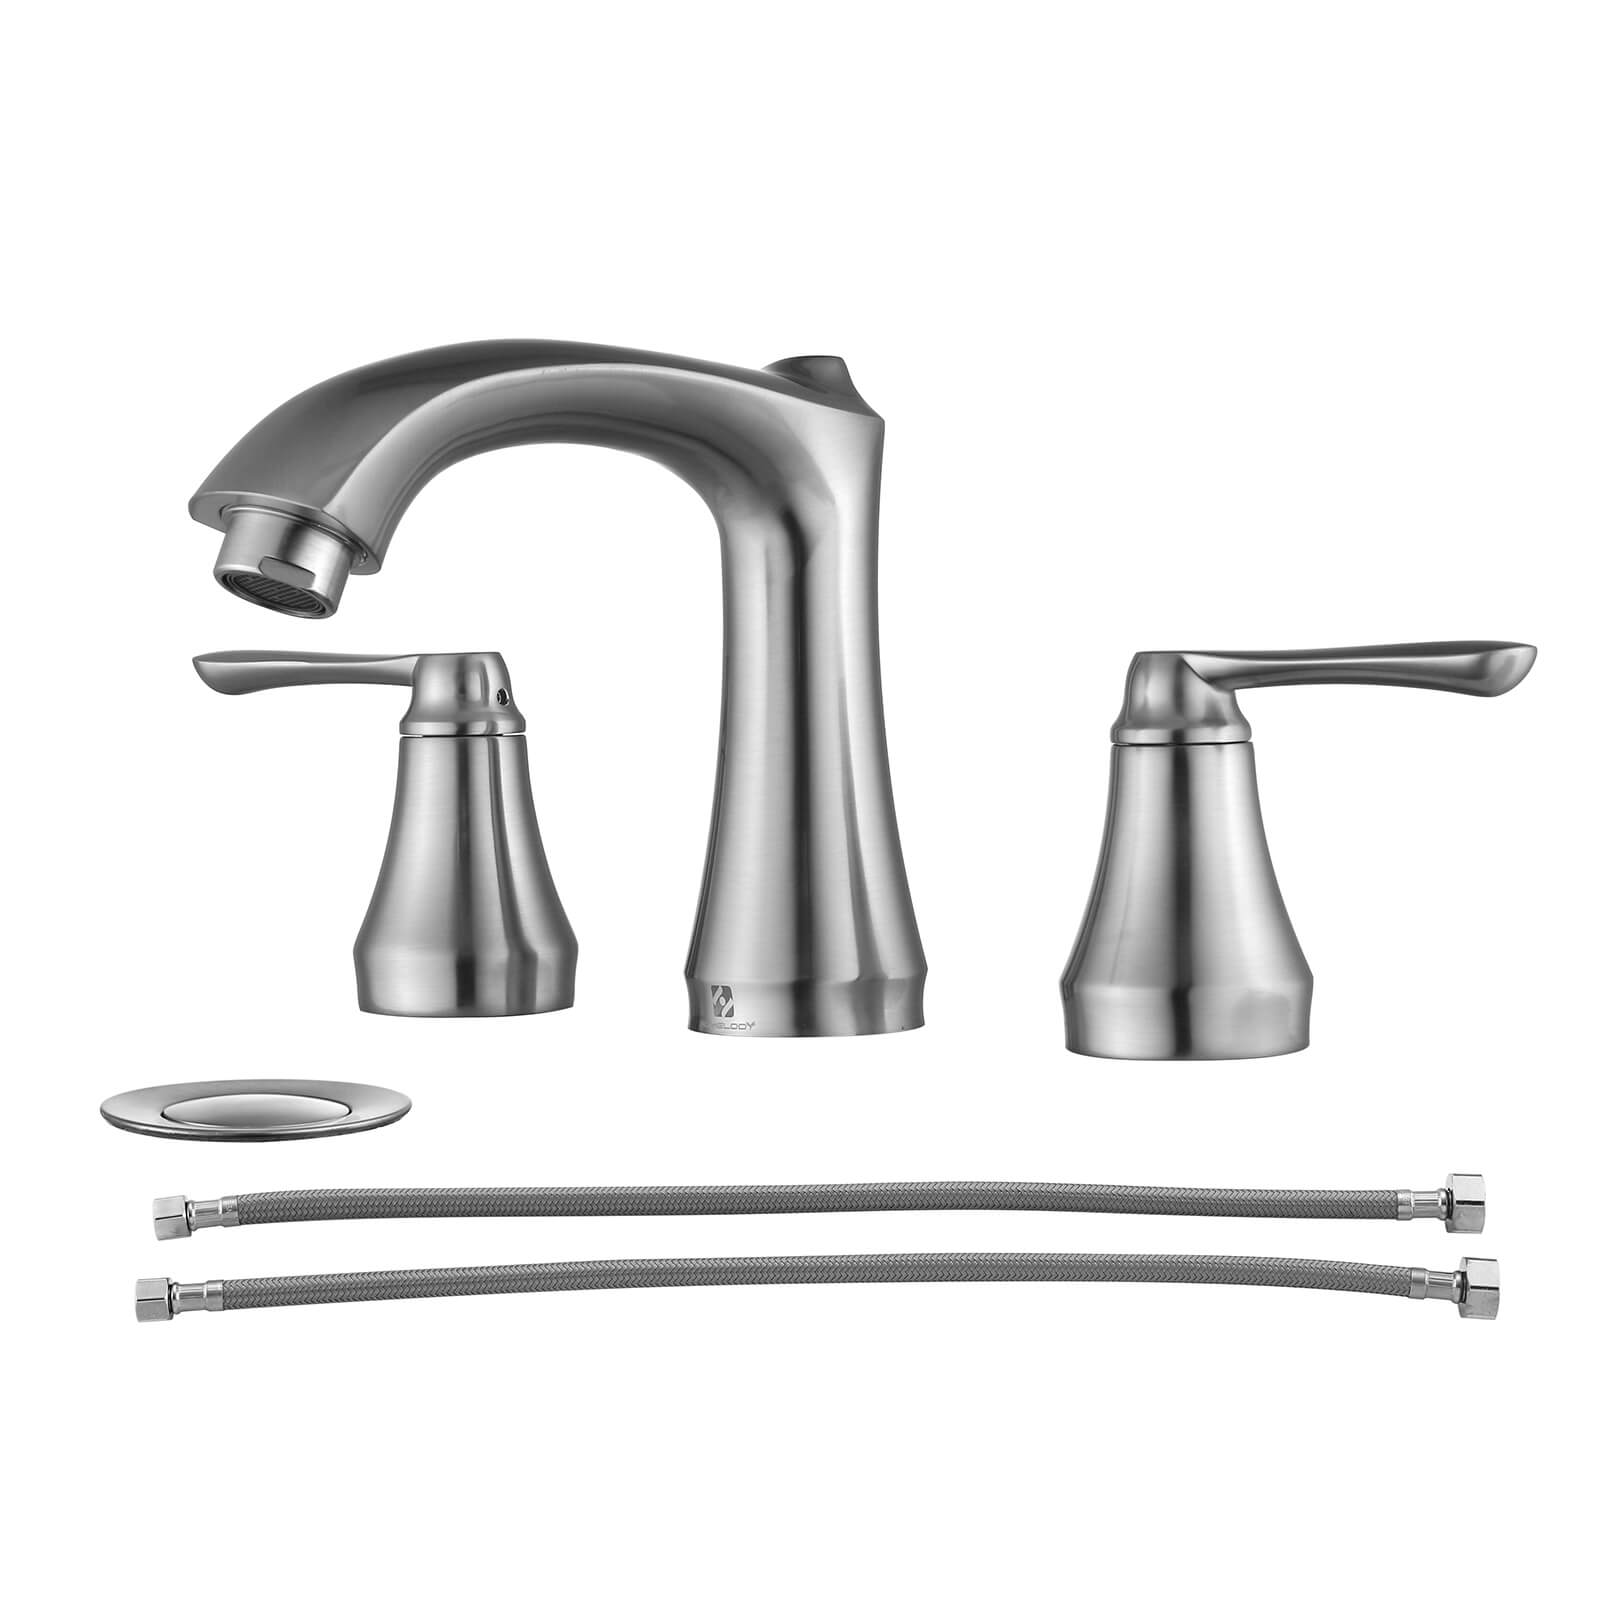 HOMELODY 8 Inch Bathroom Faucet Lead-Free Lavatory Faucet